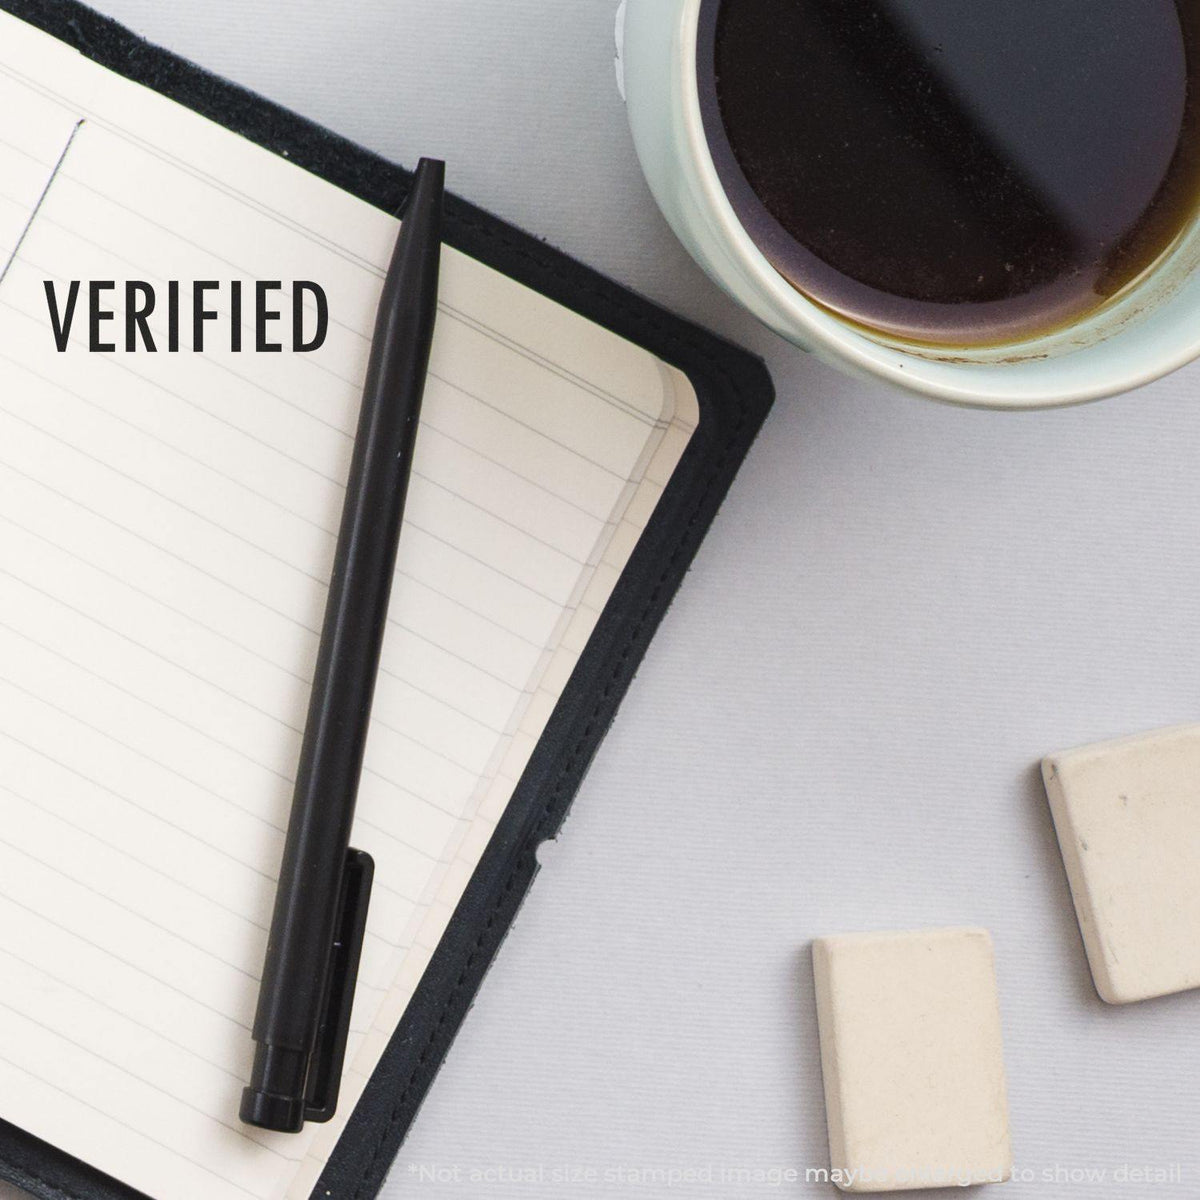 Verified Rubber Stamp Lifestyle Photo